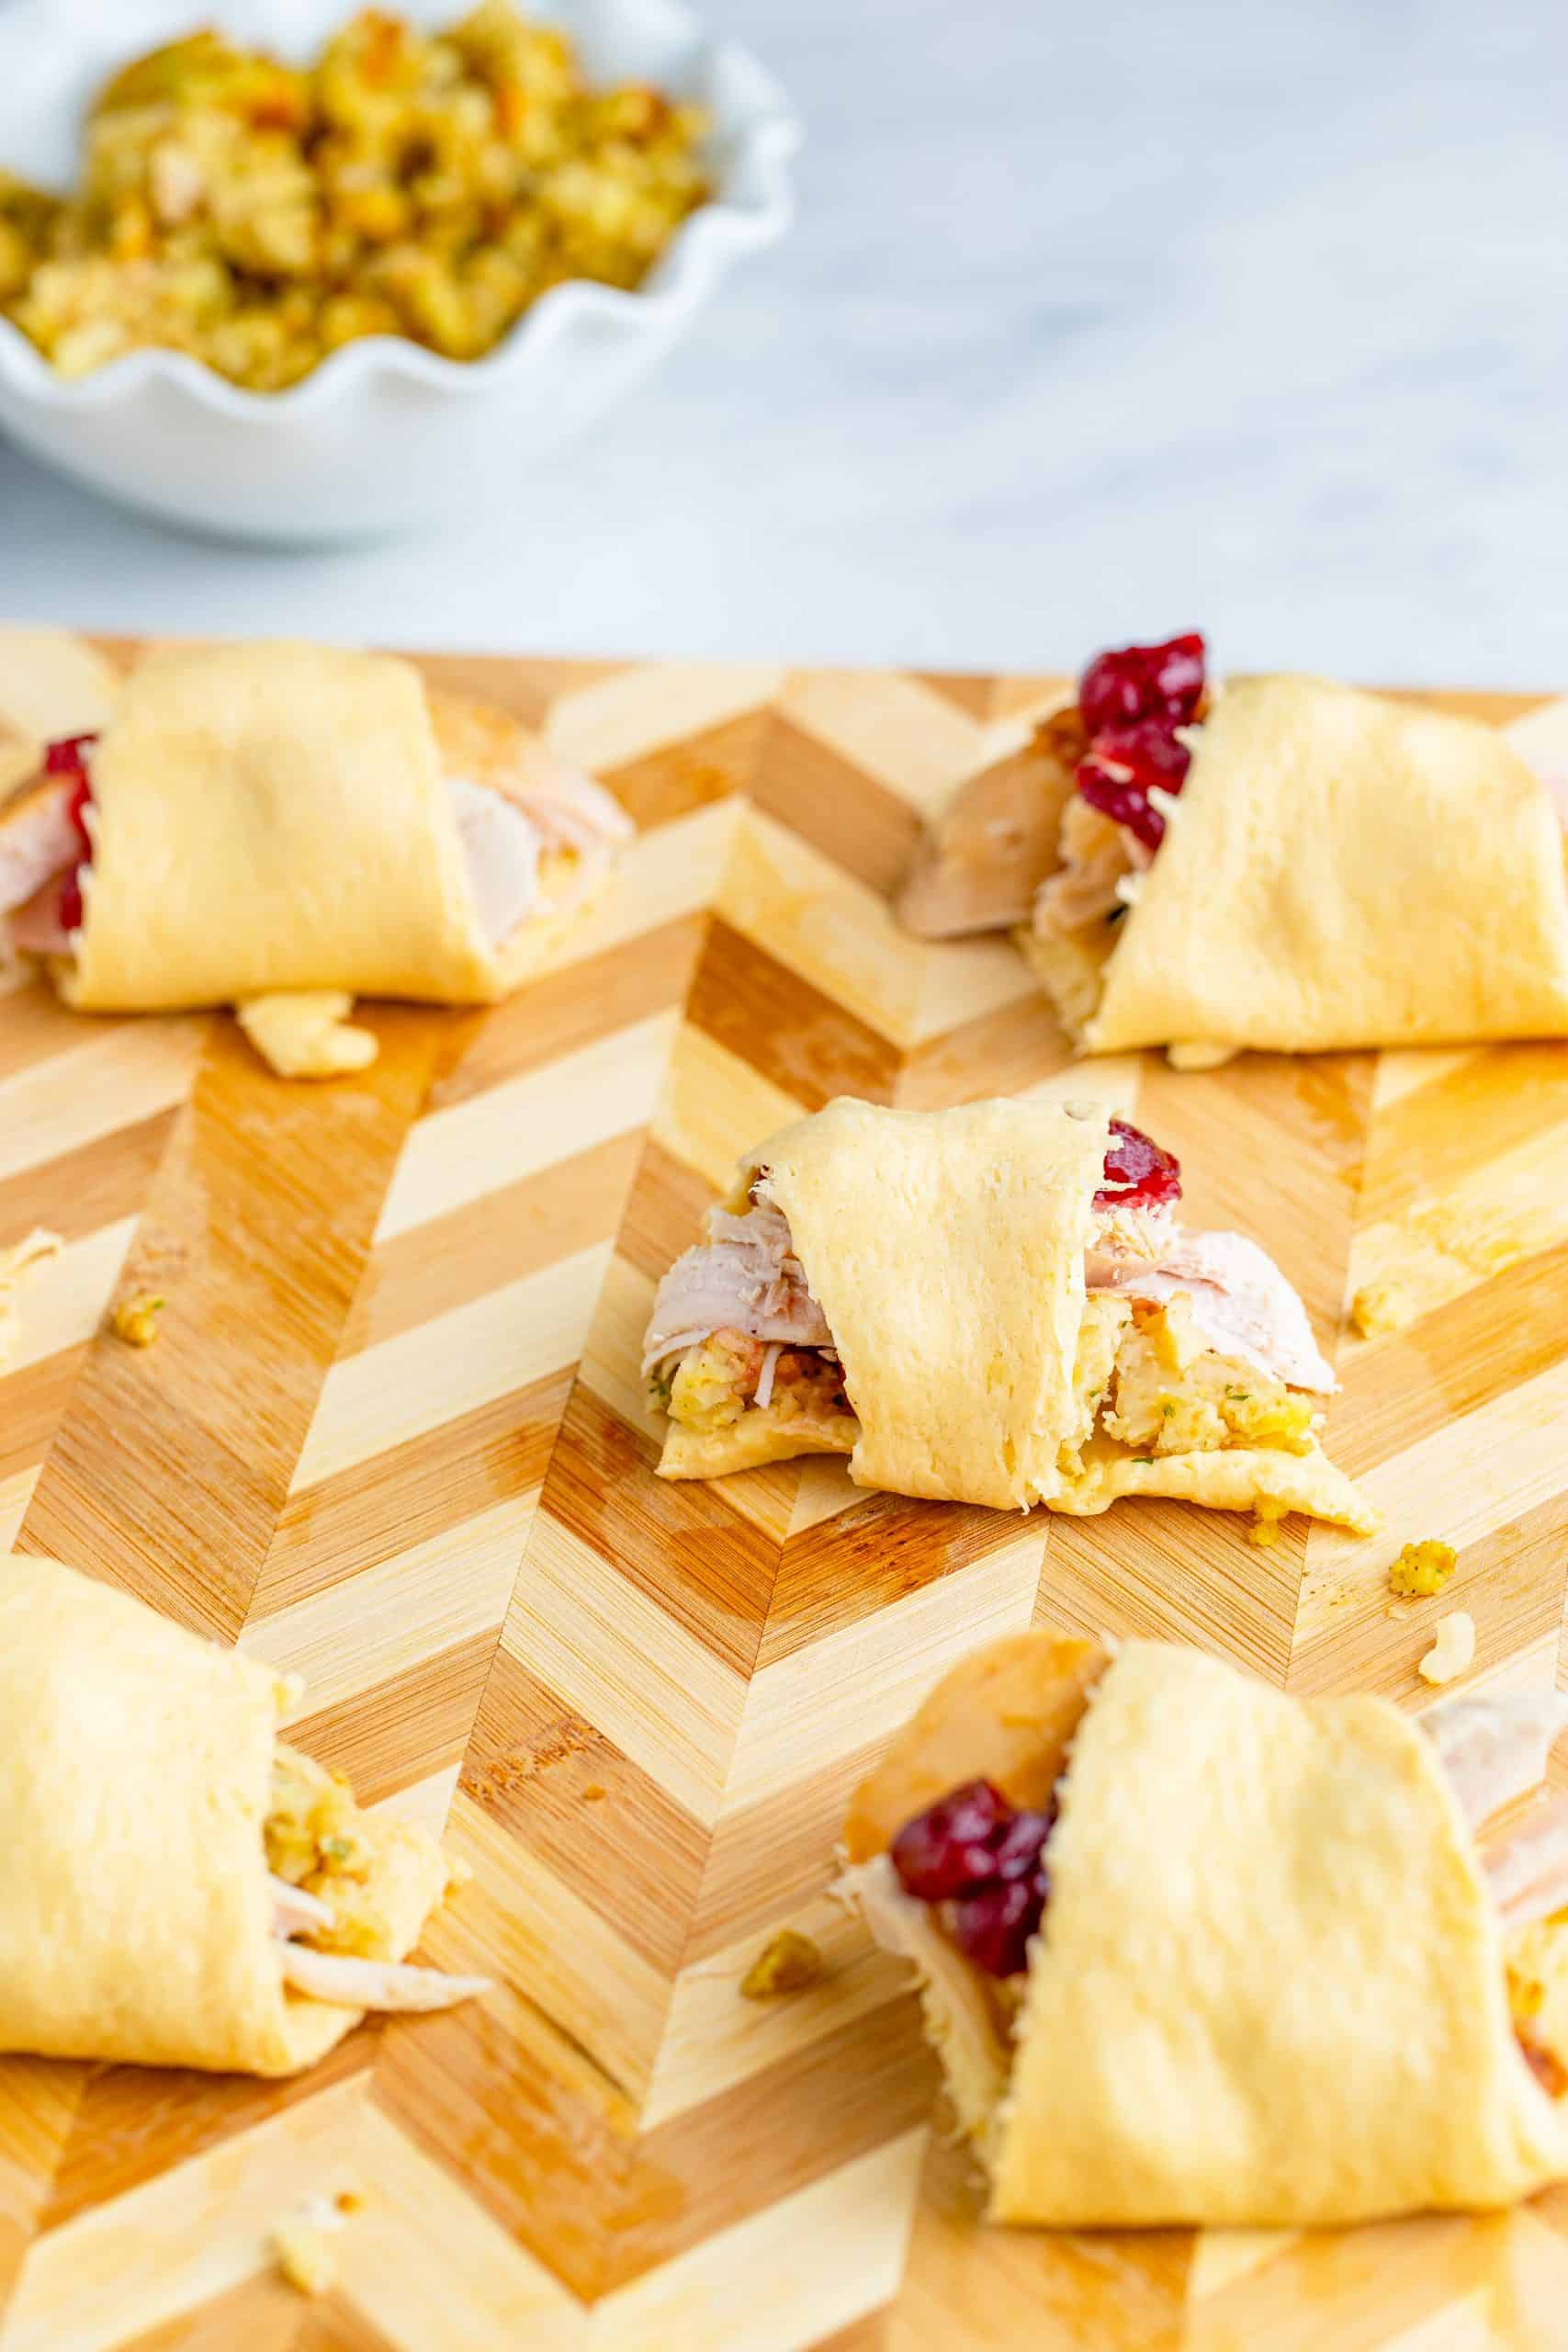 crescent roll bundles filled with sliced leftover turkey, turkey stuffing and whole cranberry sauce.